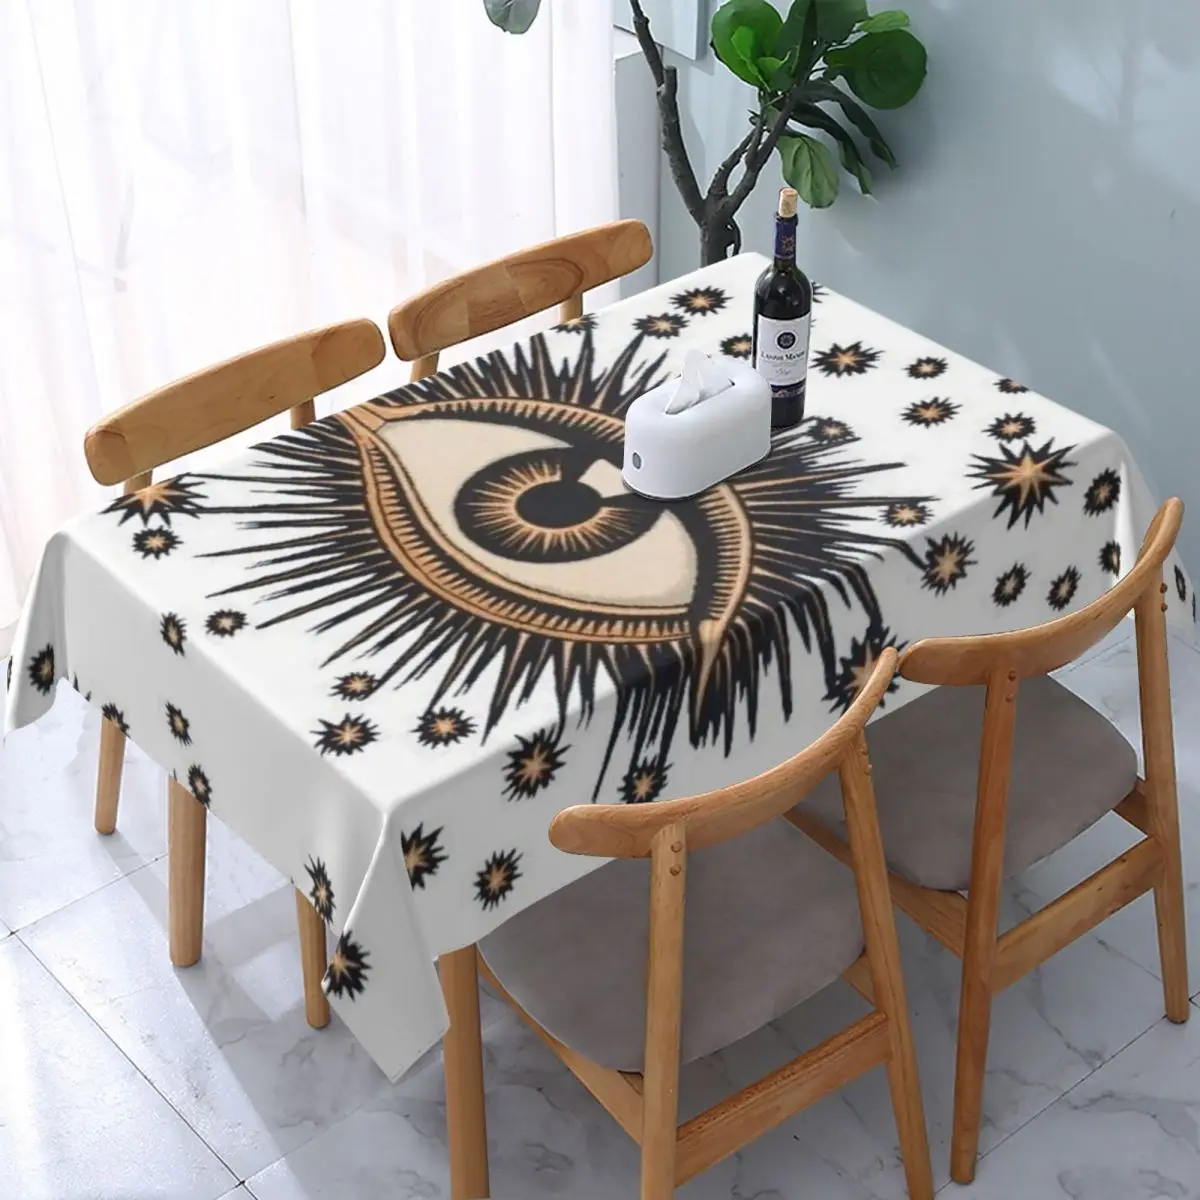 

Vintage Mystic Eye Tablecloth Rectangular Elastic Waterproof Spiritual Amulet Table Cloth Cover for Party